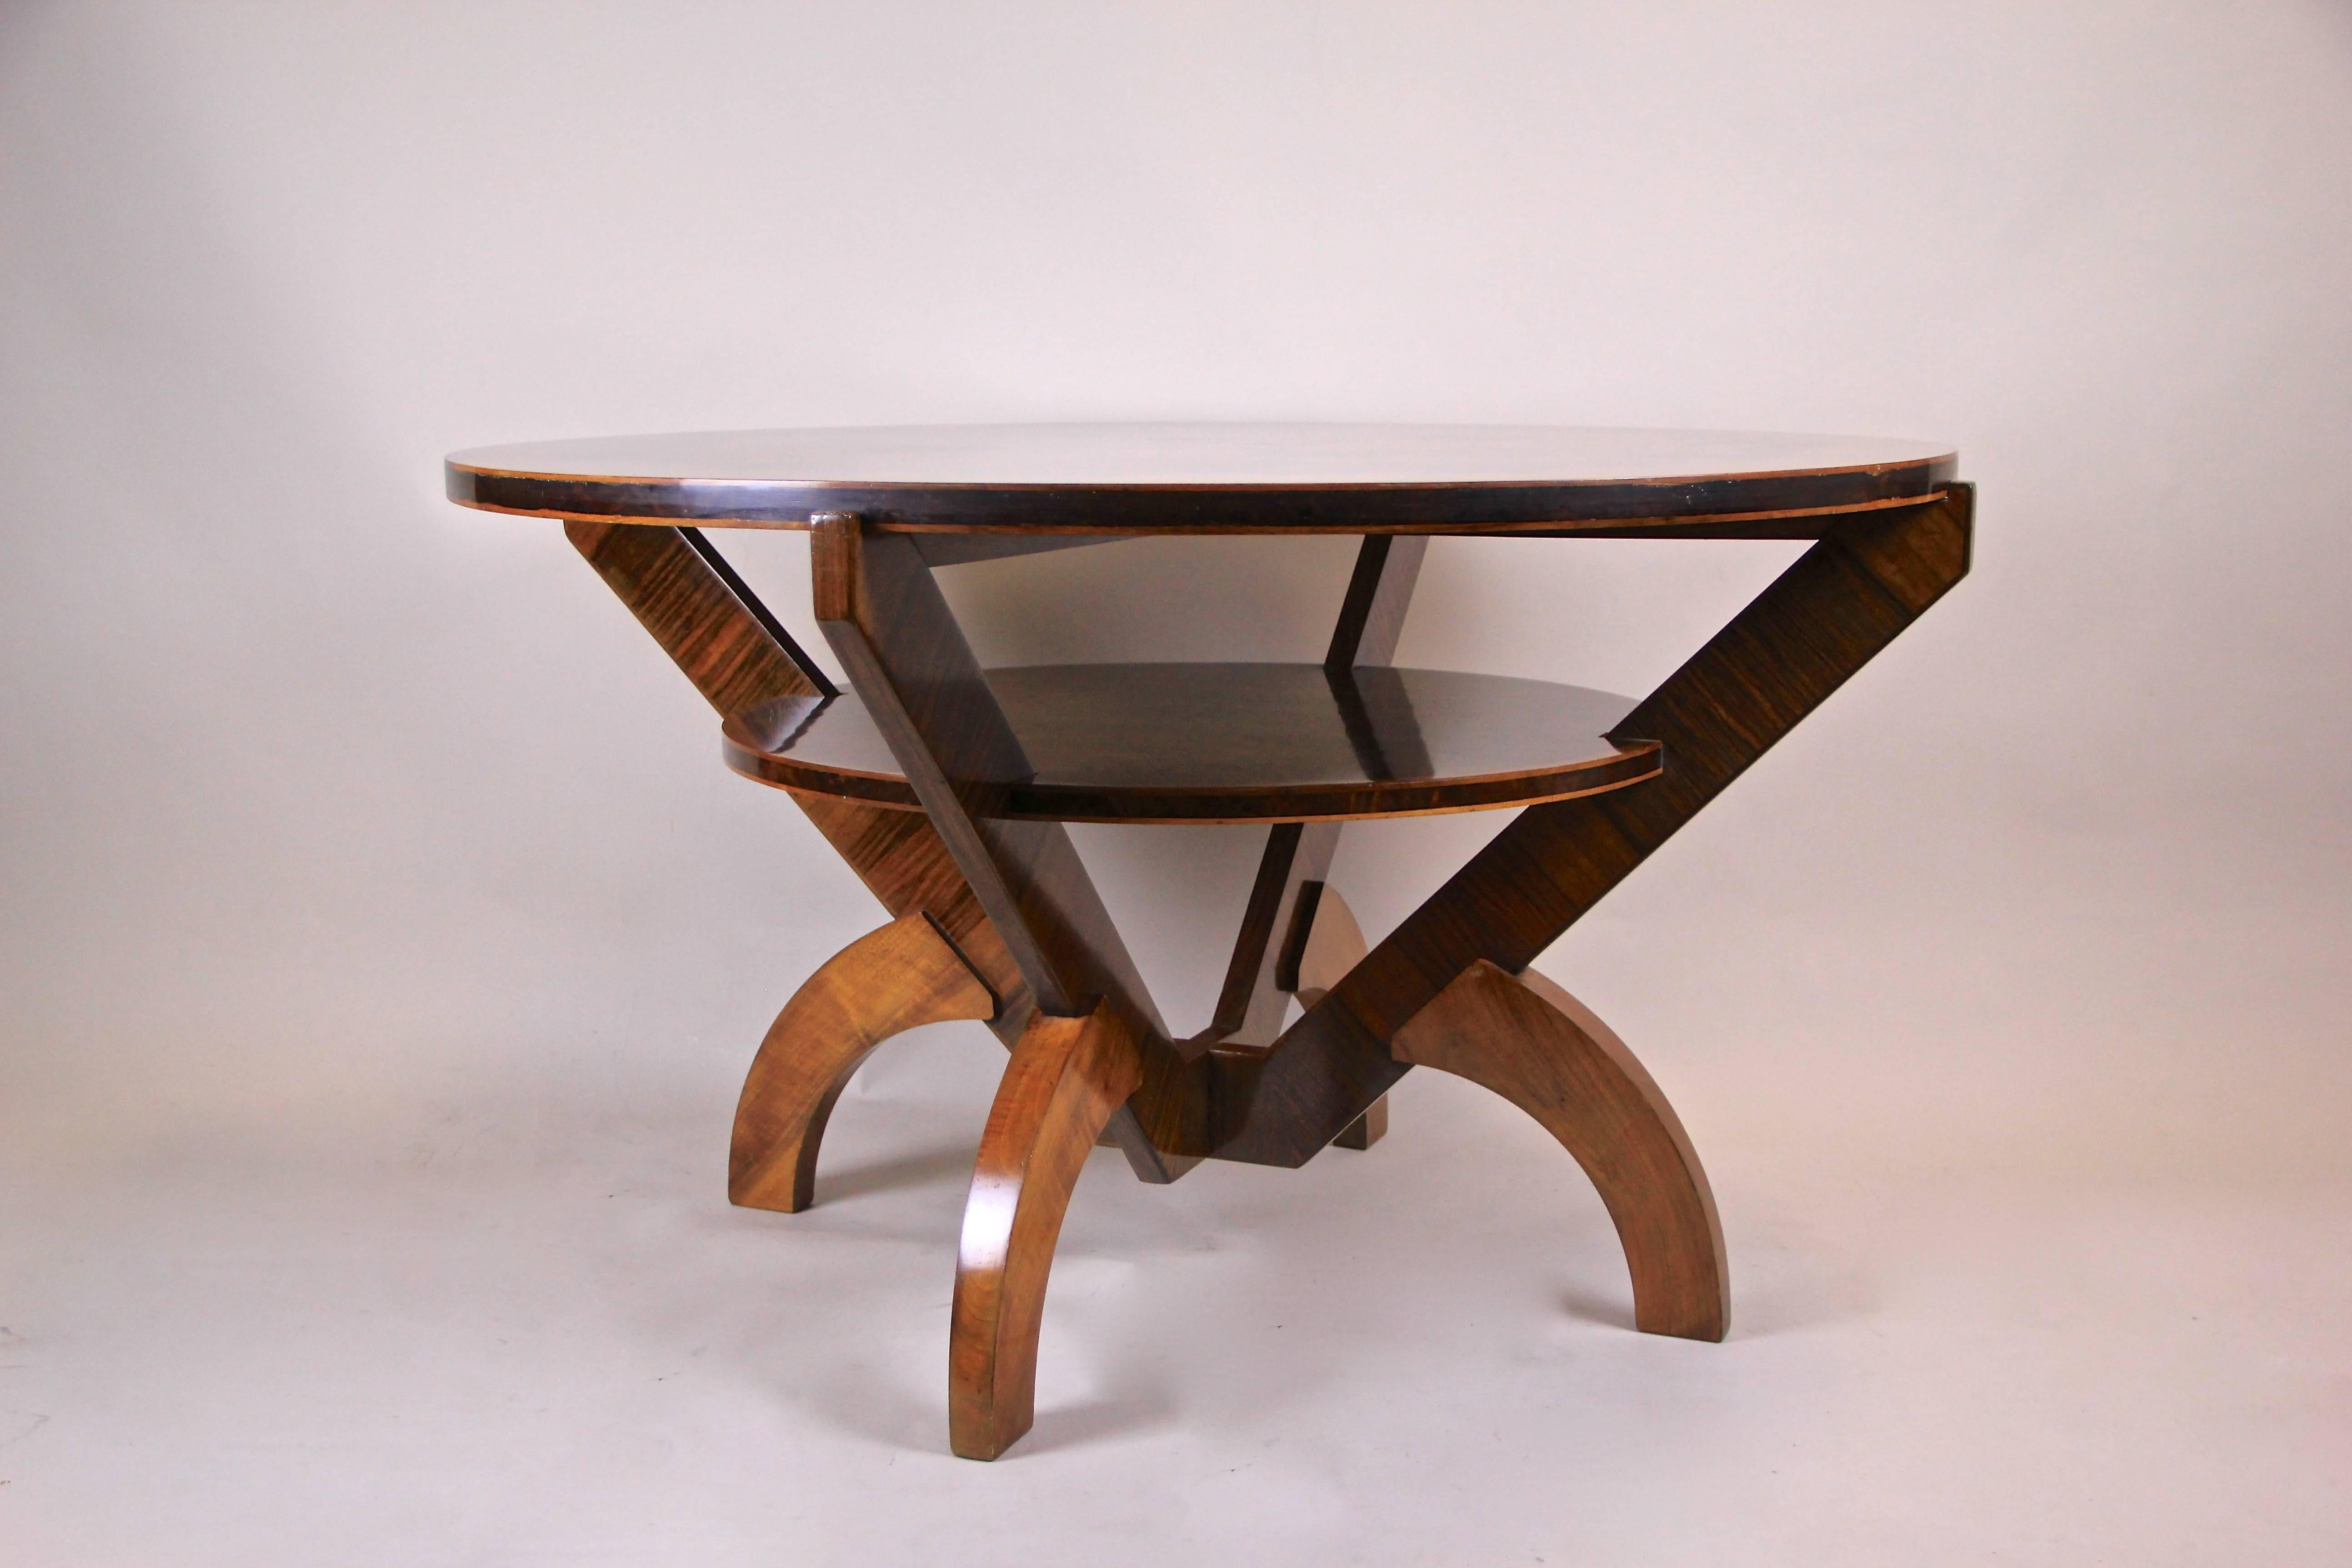 Veneer Art Deco Table with Marquetry Work by A. Herrgesell, Austria, circa 1925